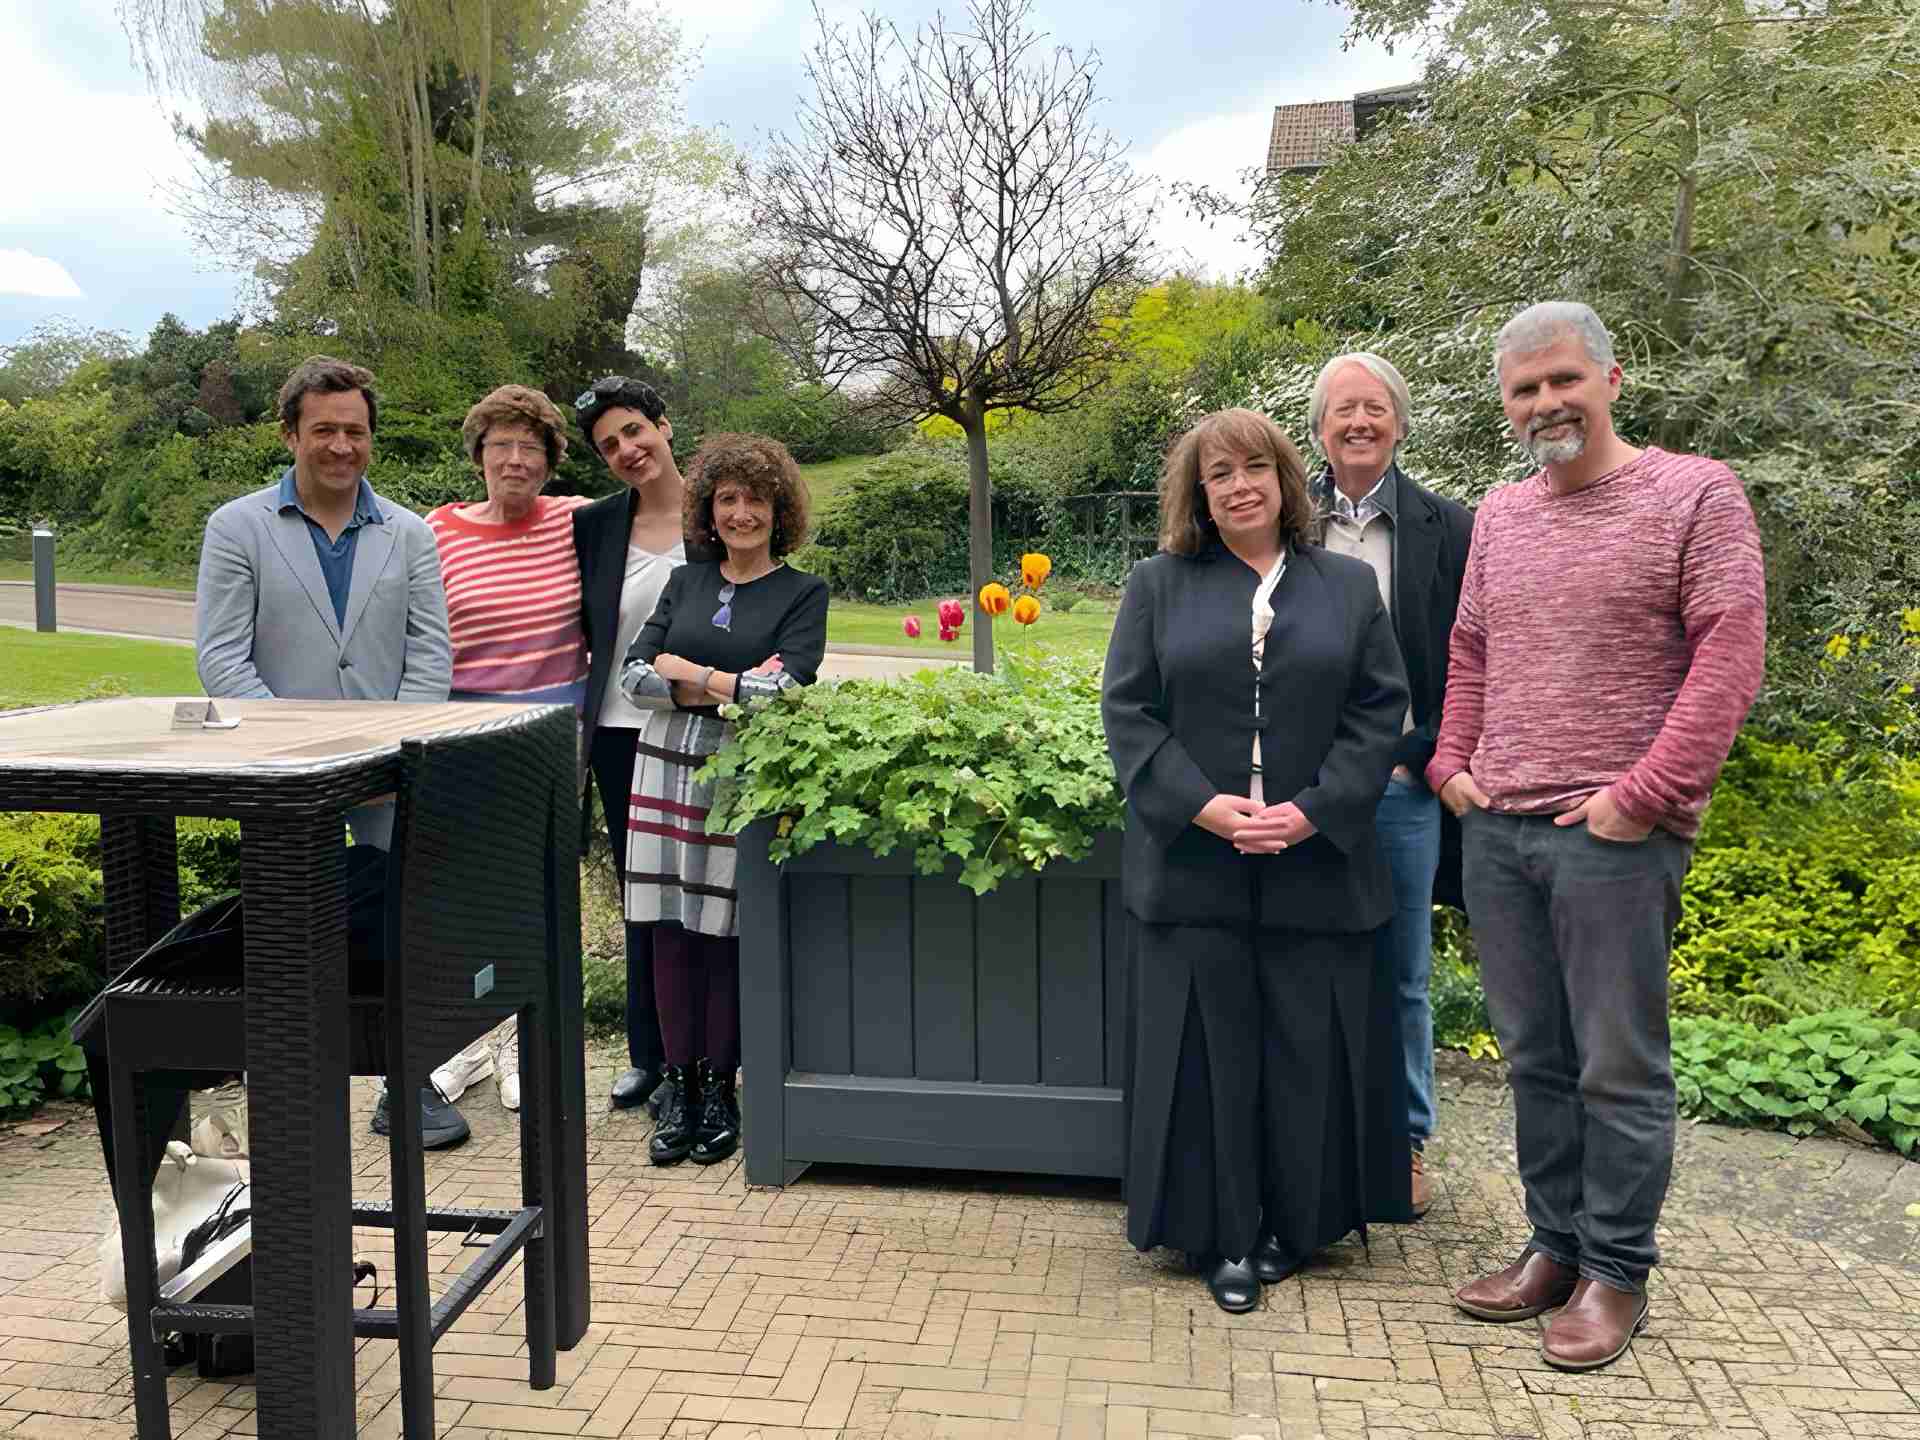 The second round of EUTOPIA's Connected Communities meet at the University of Warwick